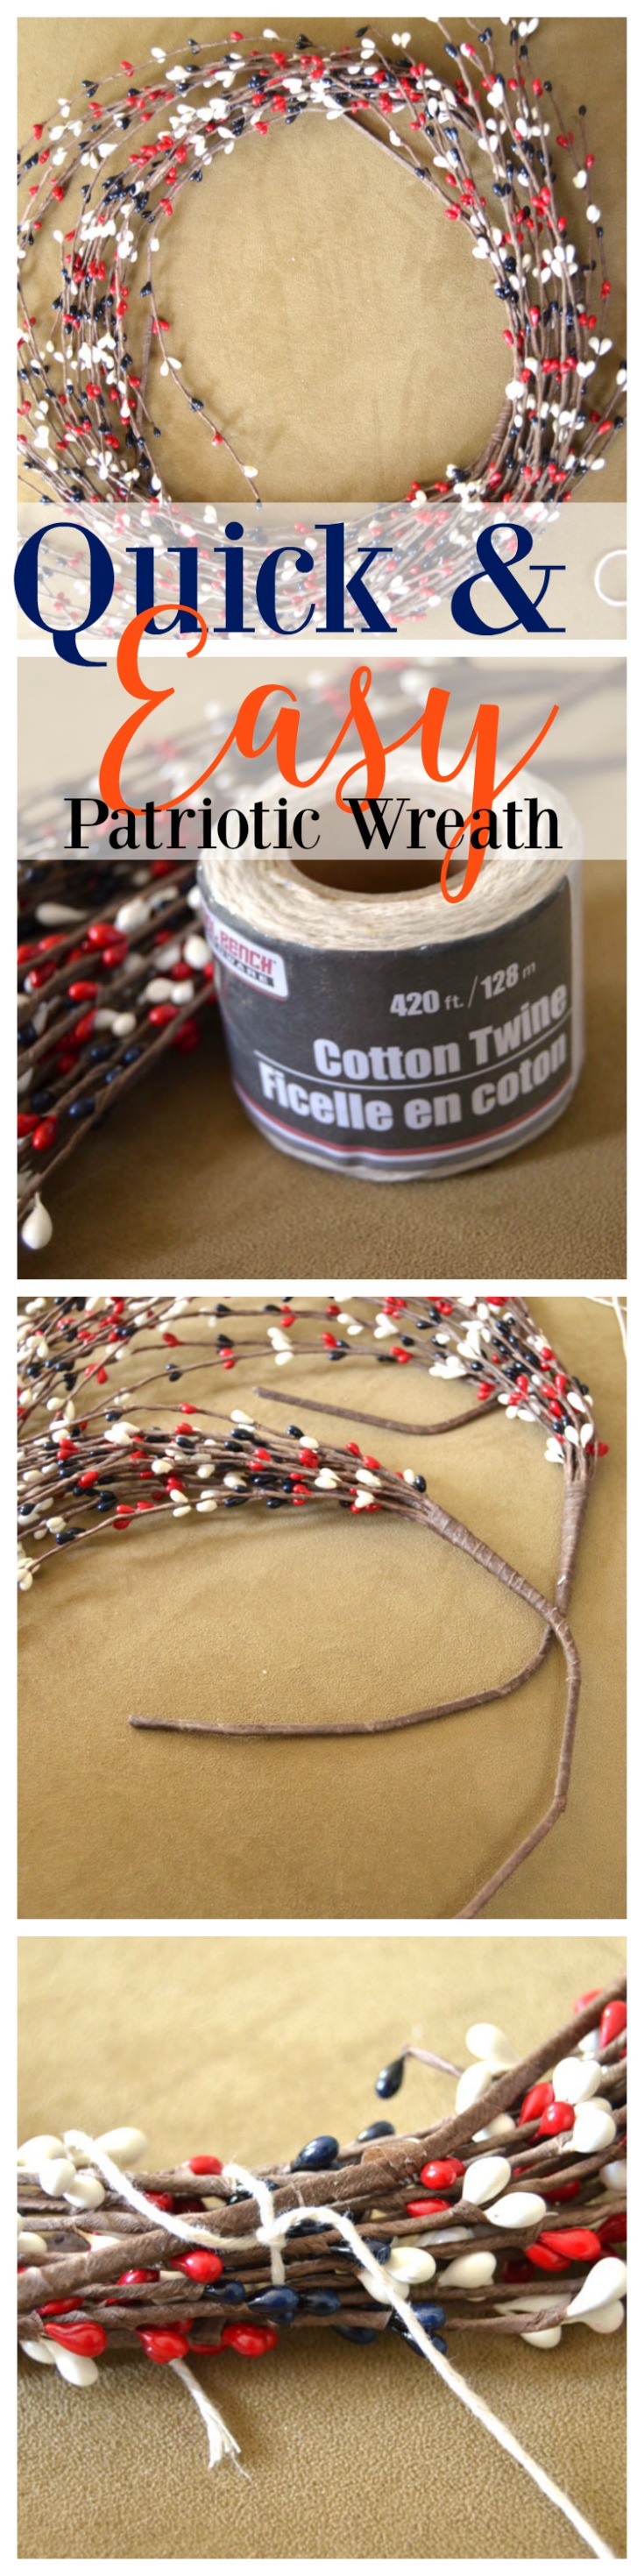 Fast and easy patriotic wreath made with red white and blue floral bead sprays